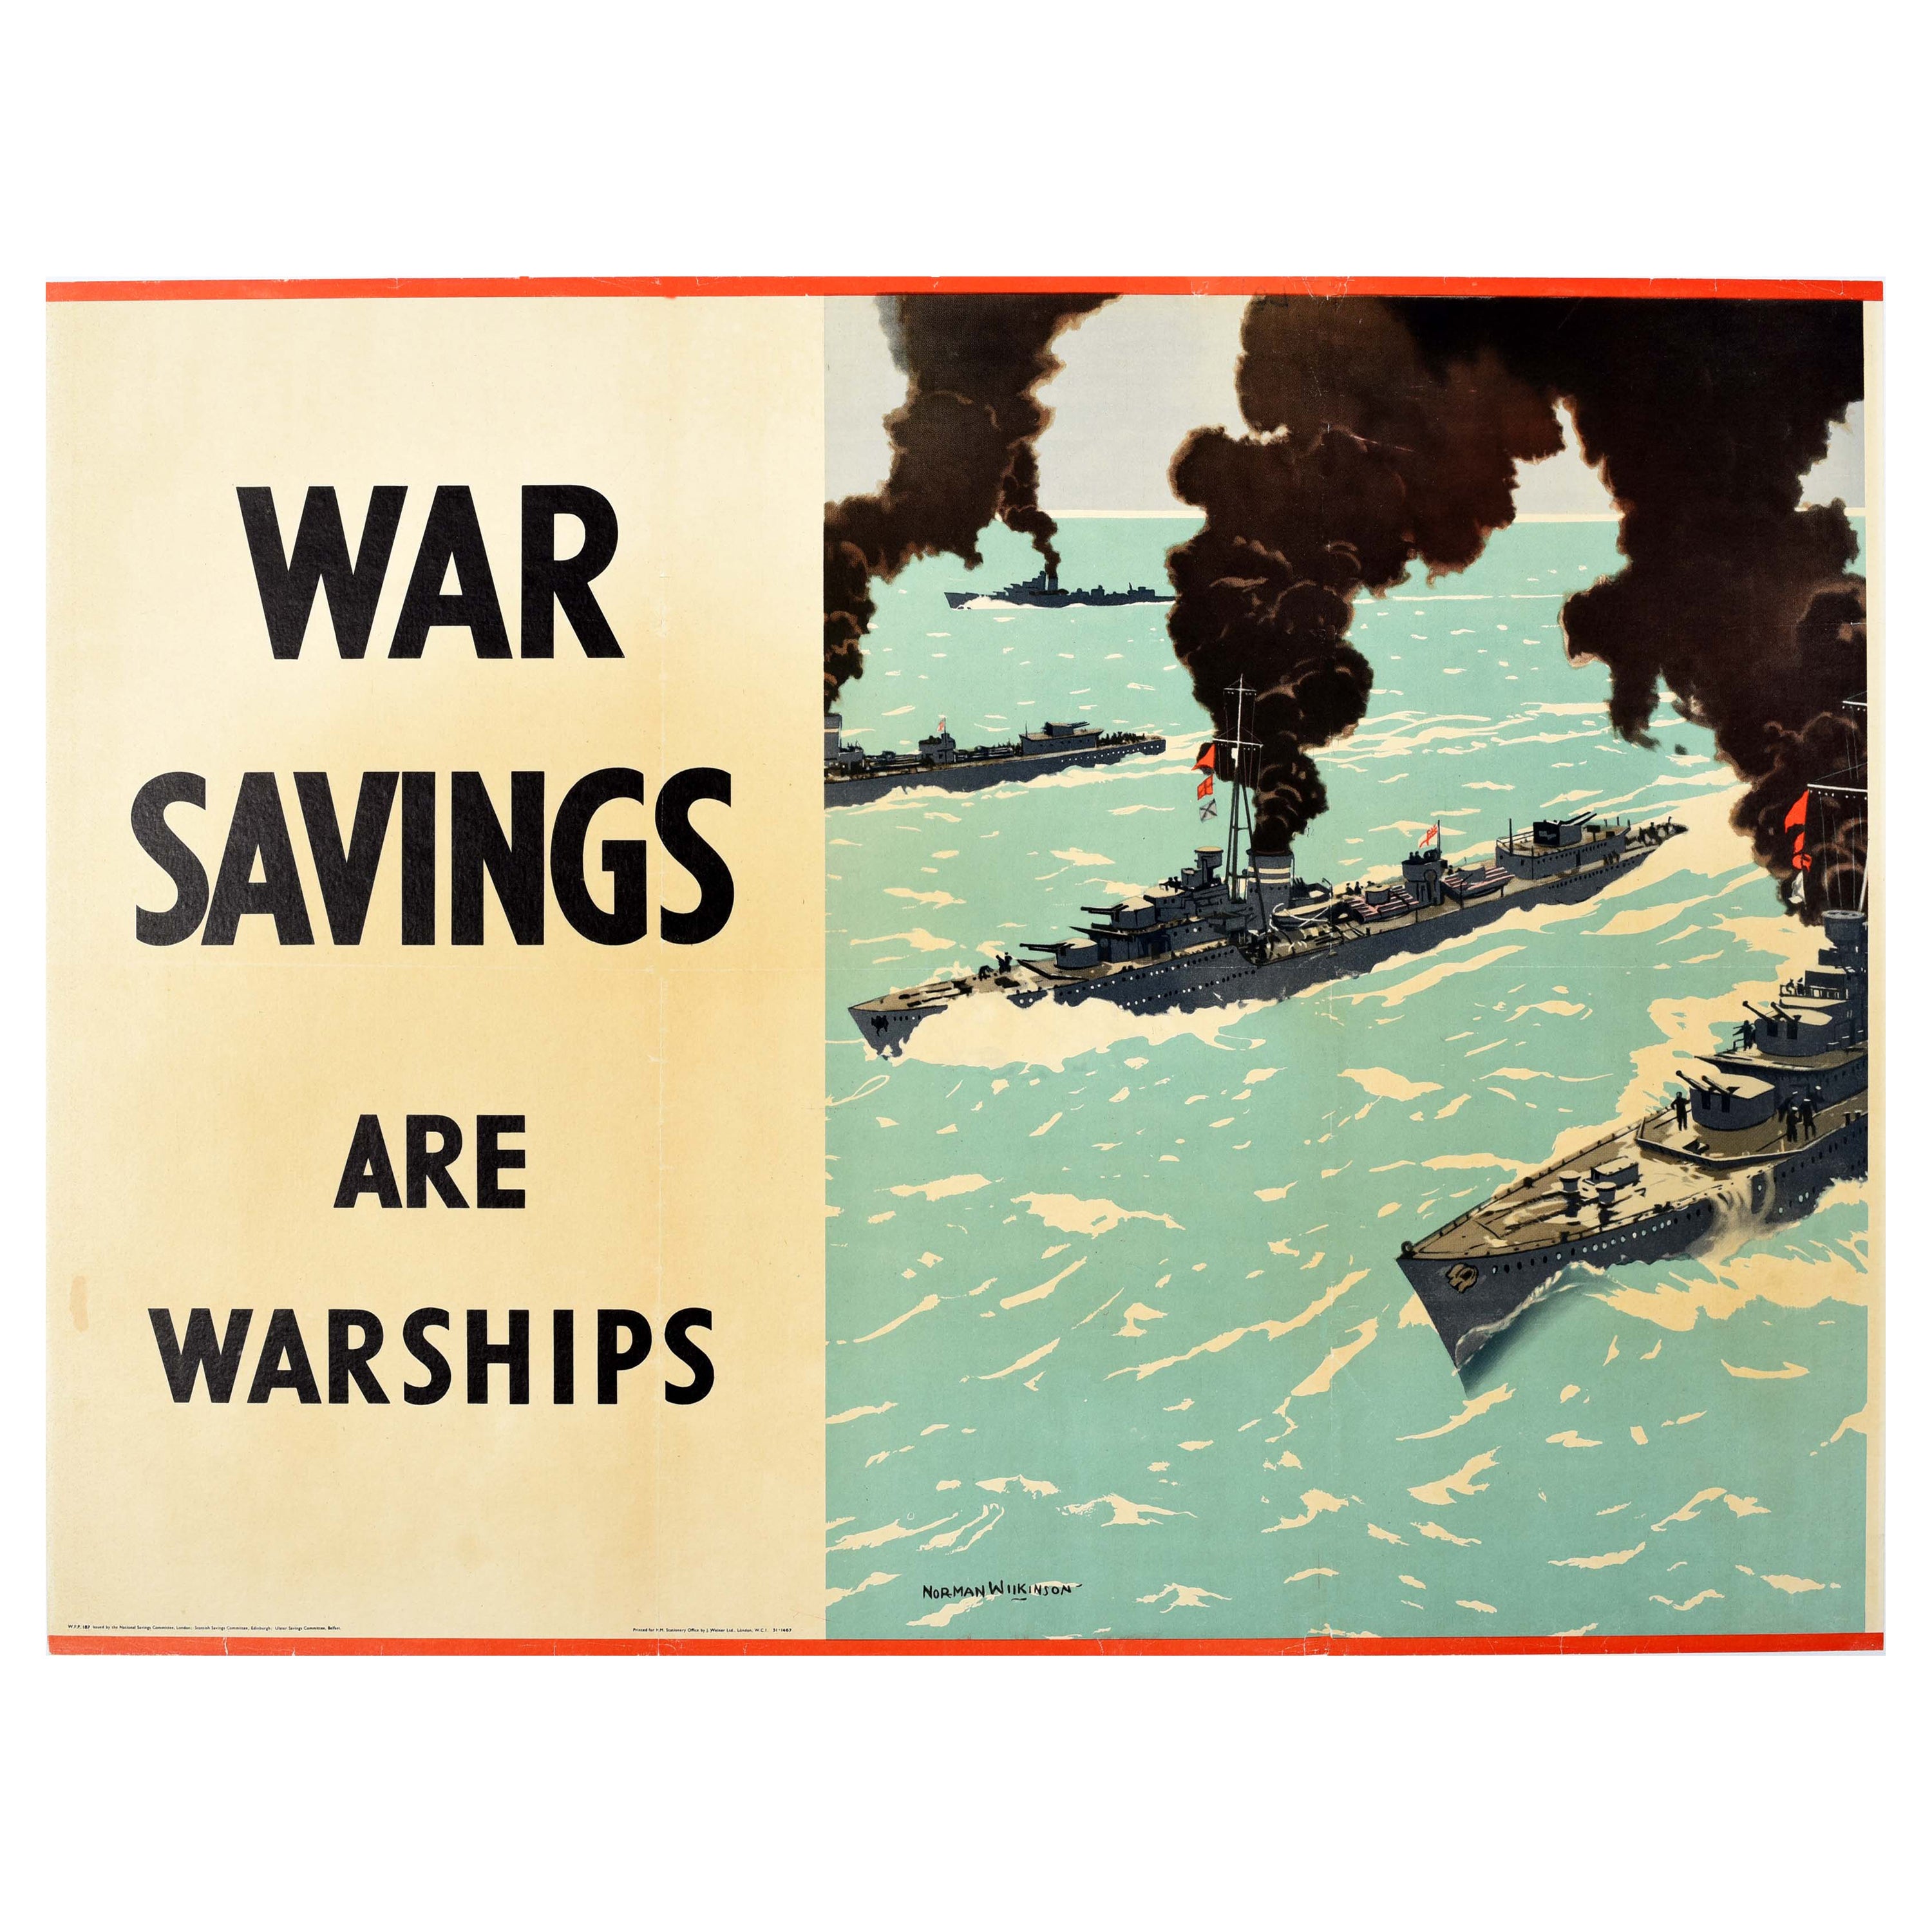 Original Vintage Poster War Savings Are Warships Norman Wilkinson WWII Navy Sea For Sale